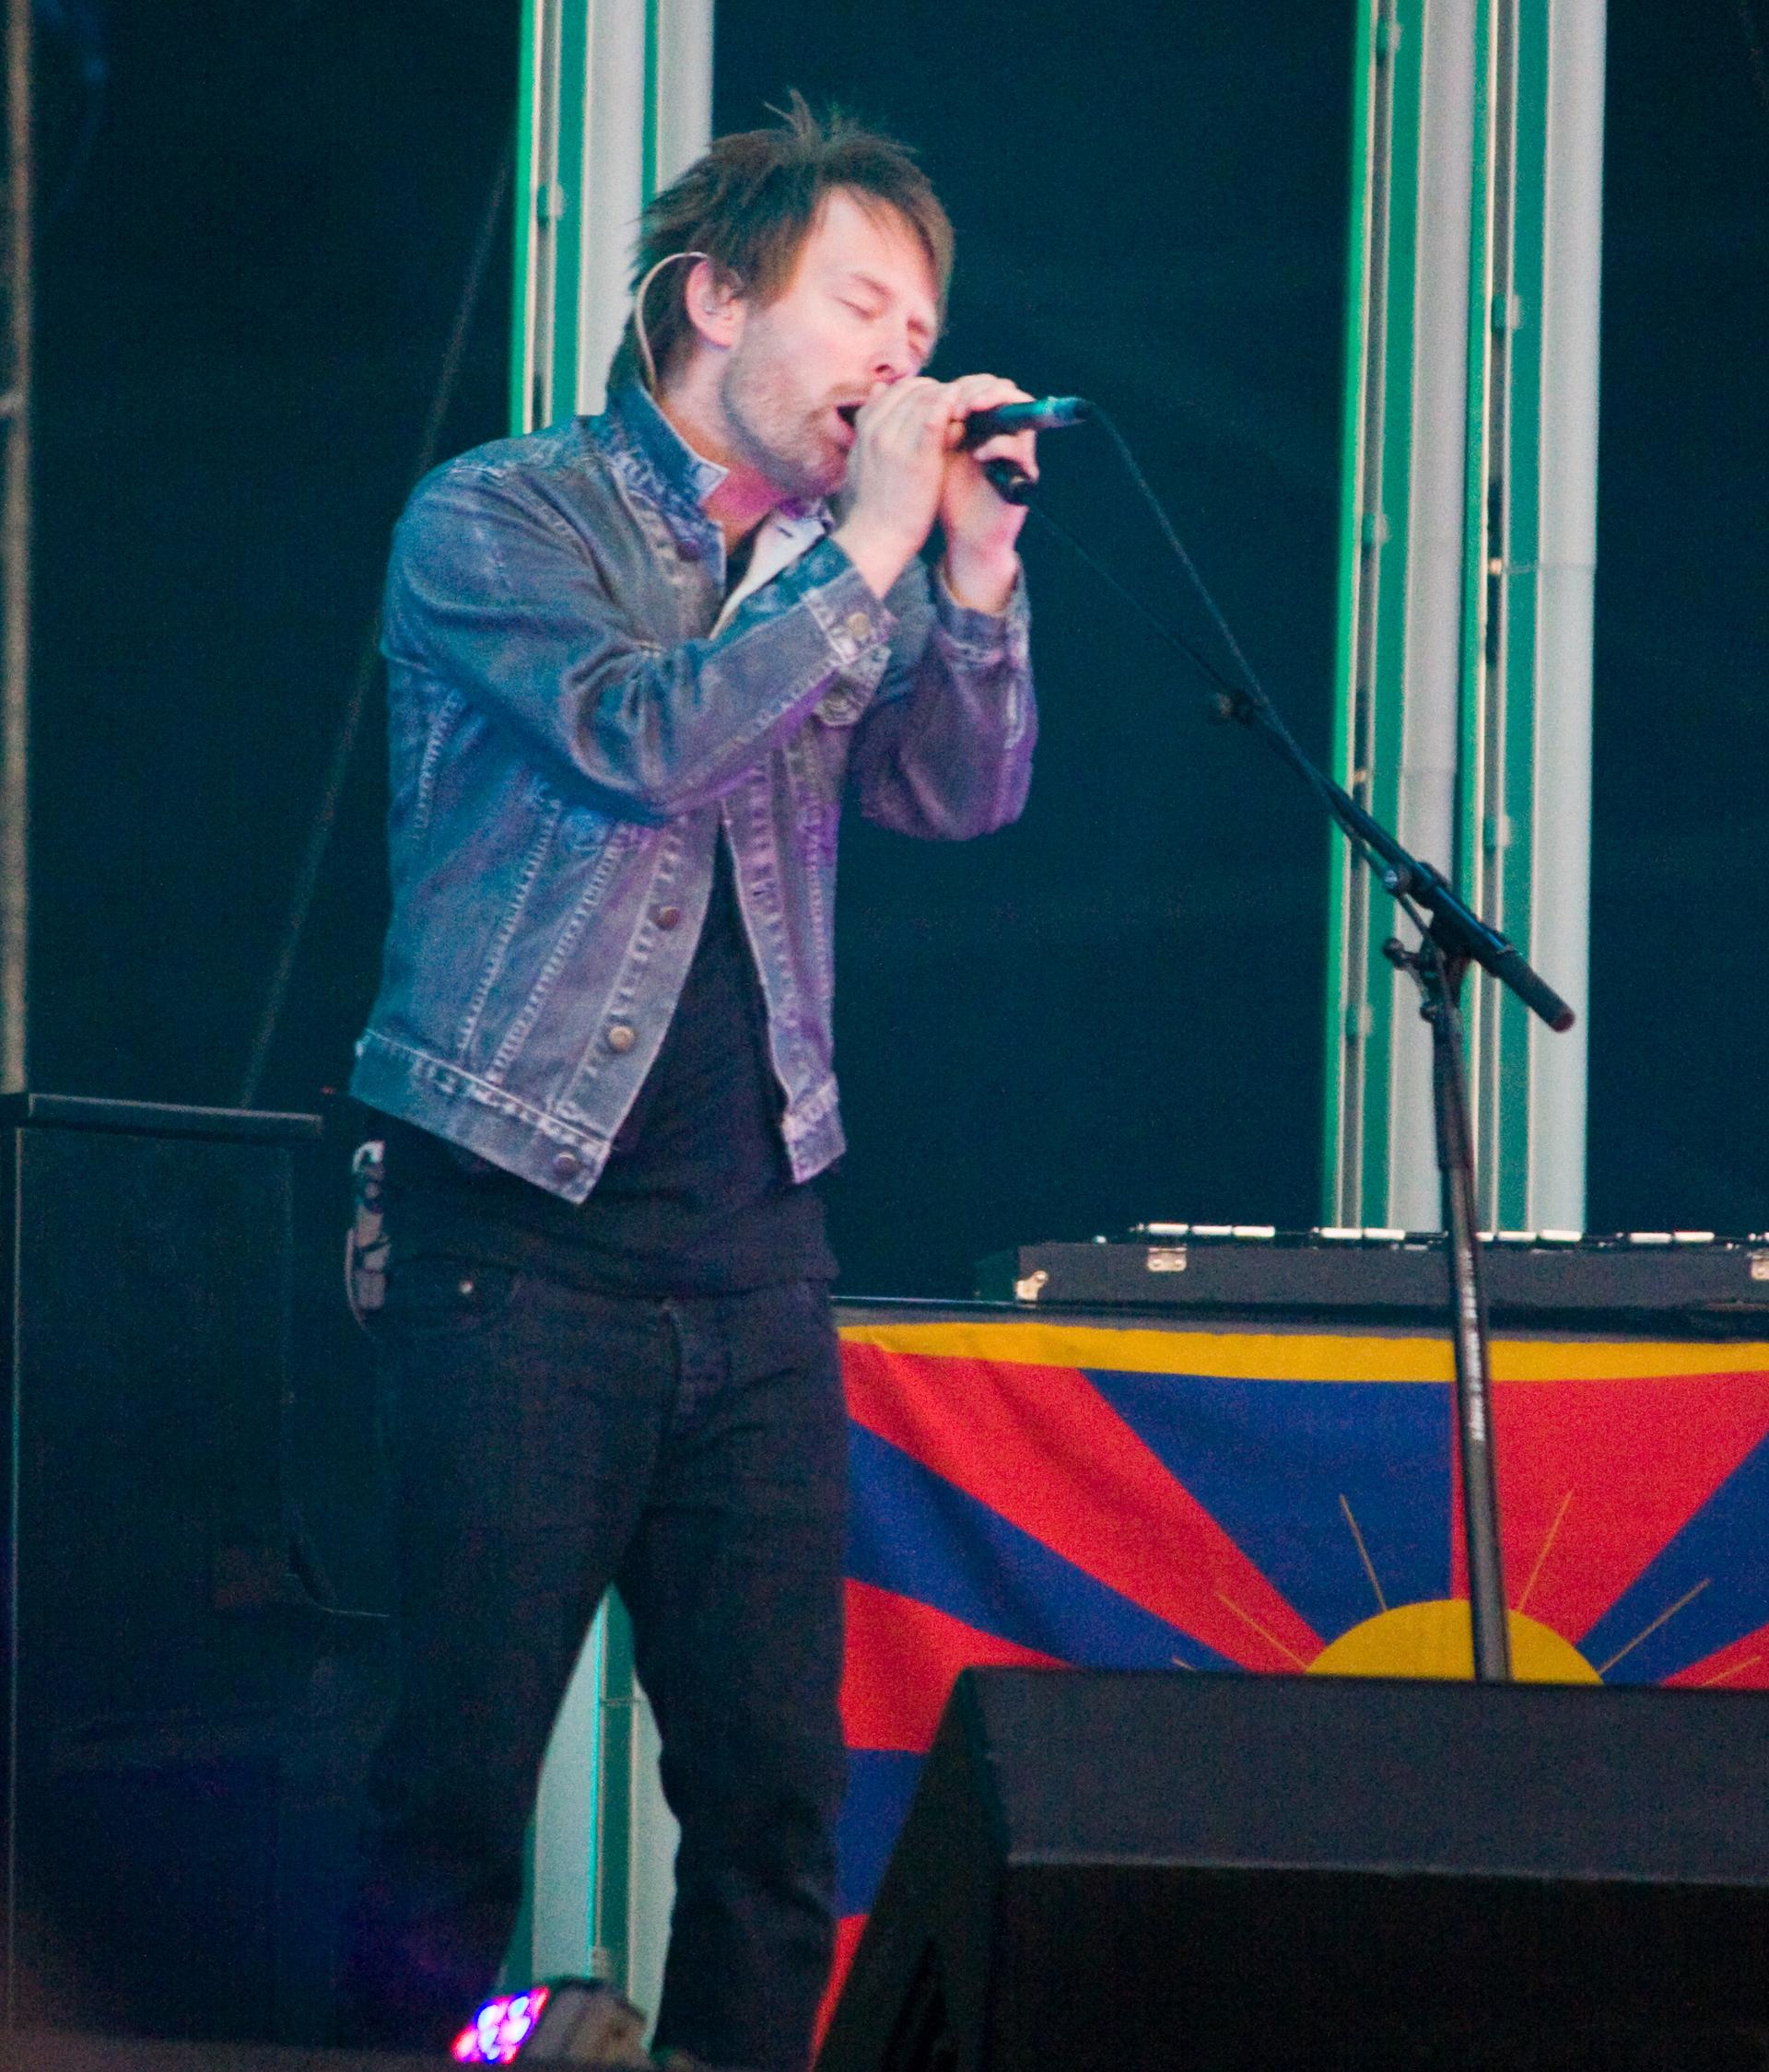 Tom York sings in front of a Tibetan flag during a show in London in 1998.